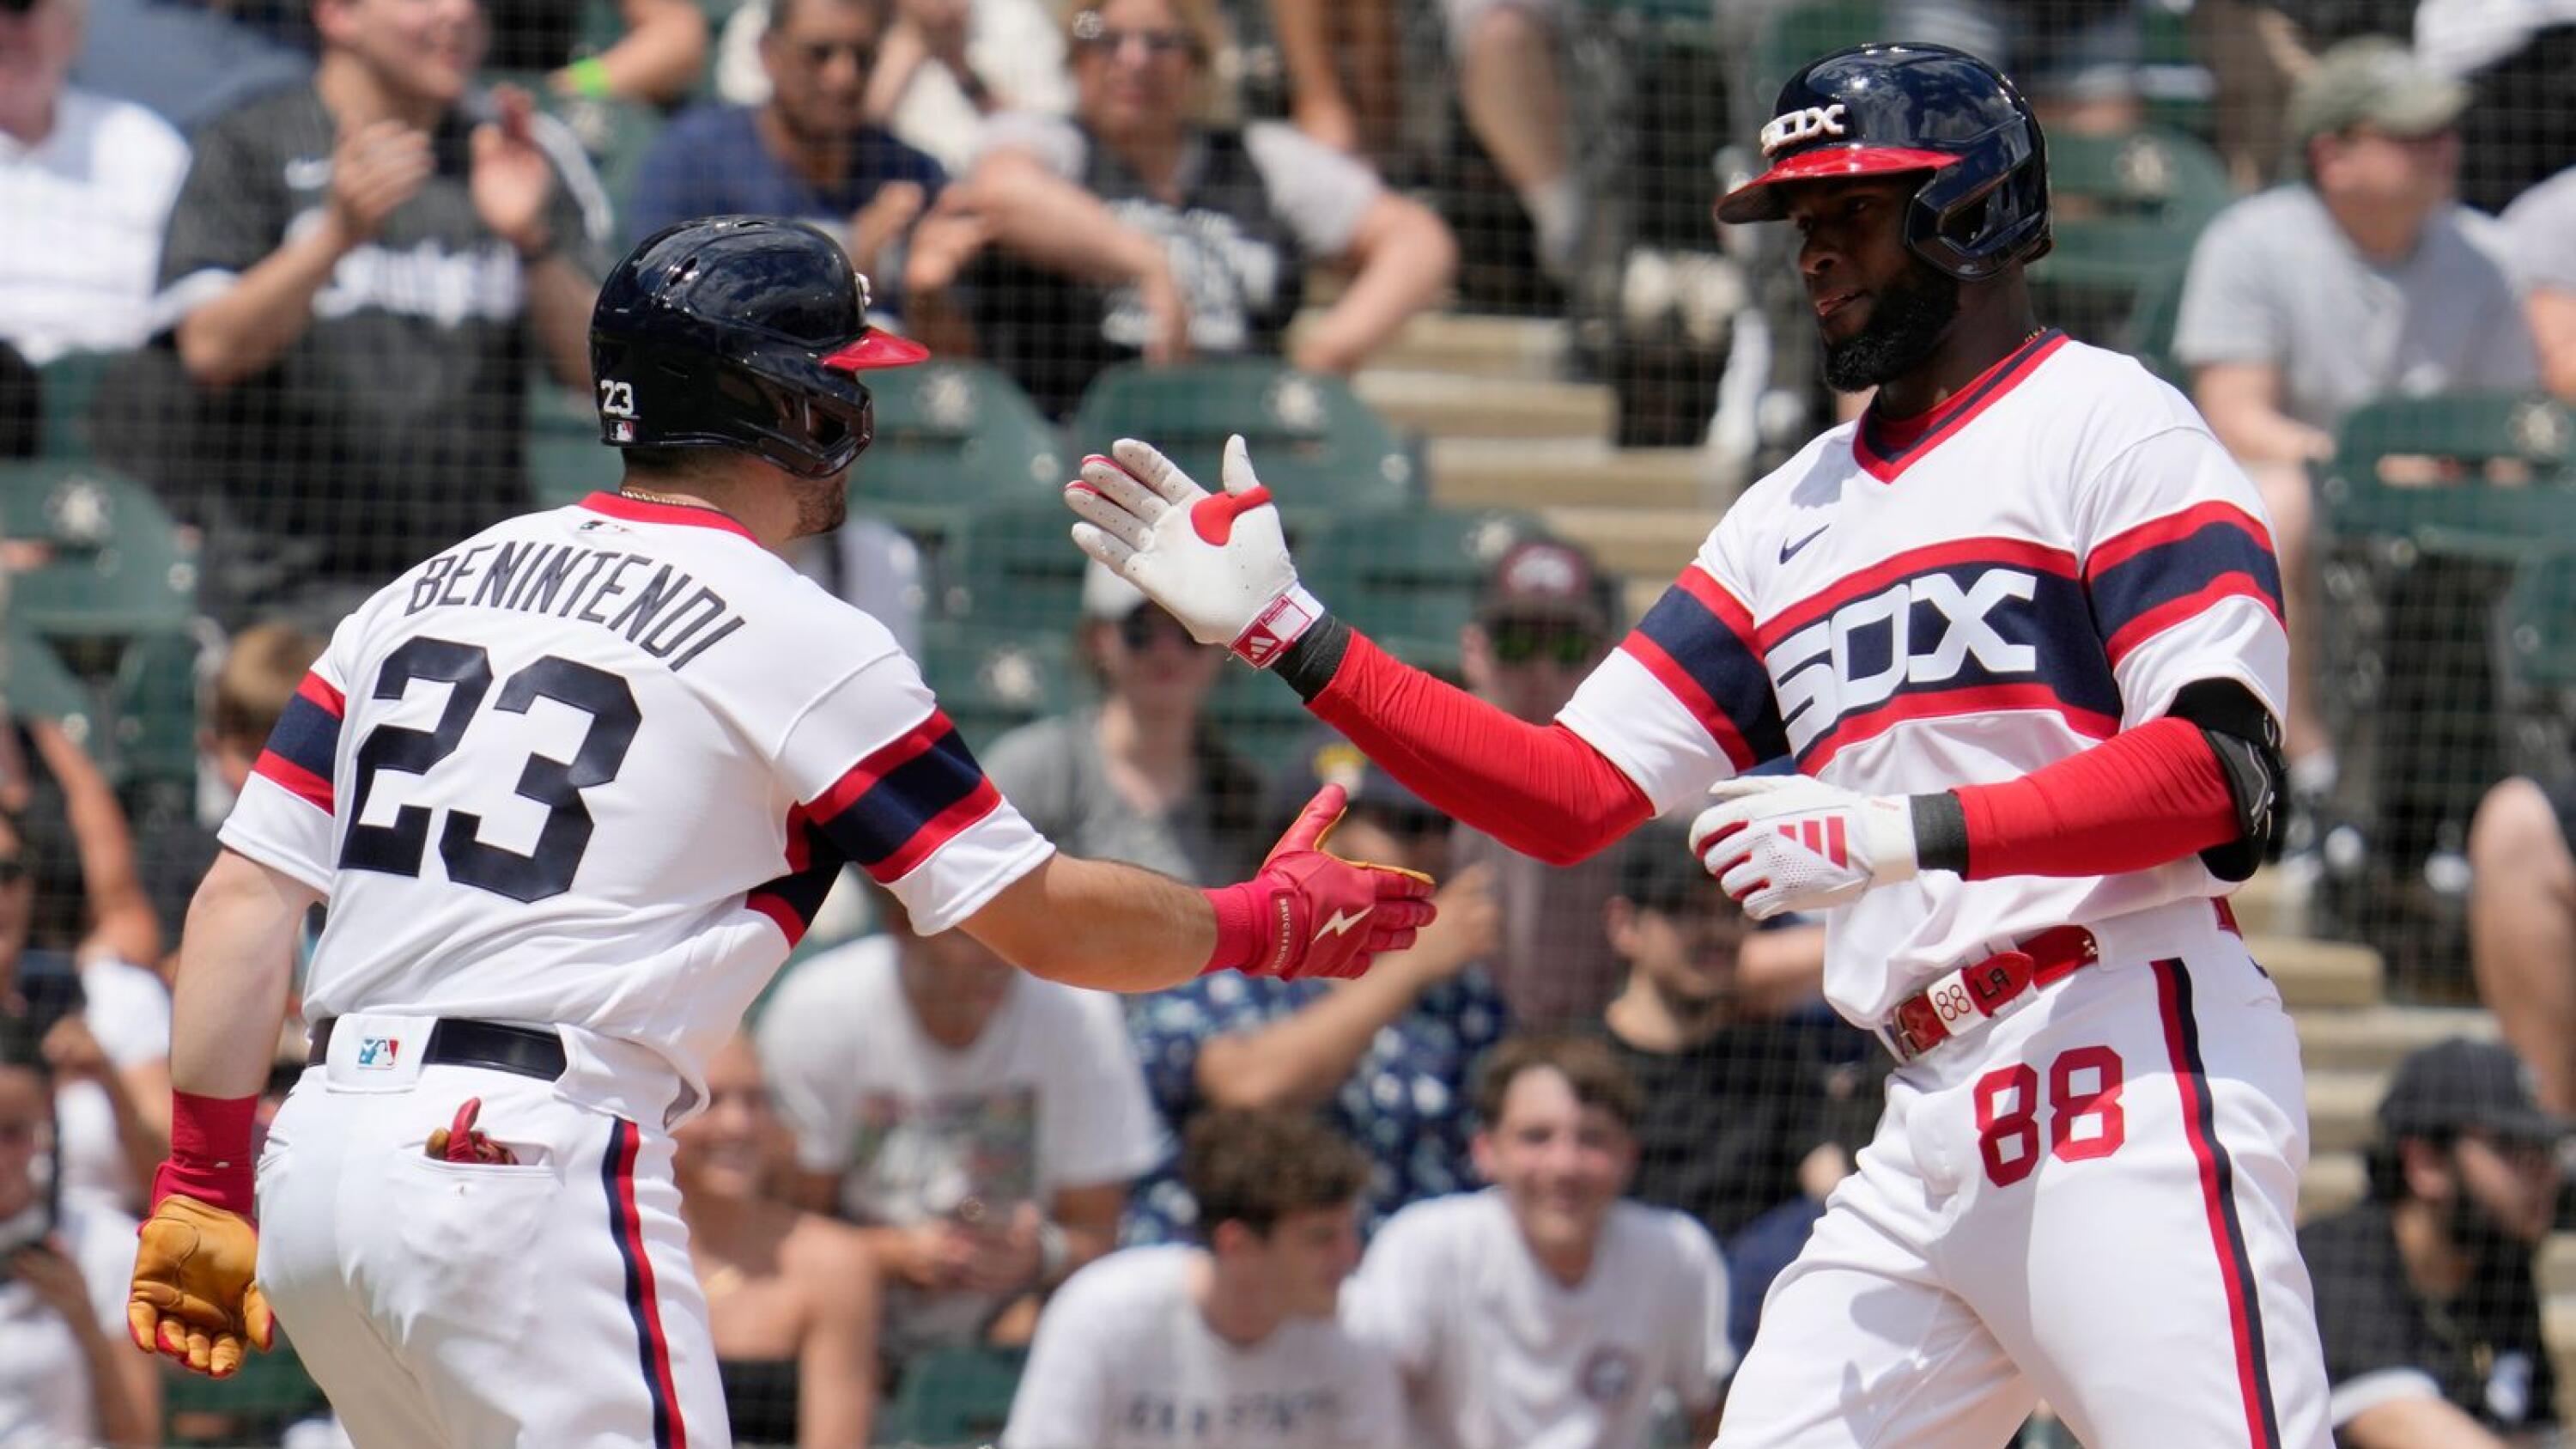 Robert homers twice to power White Sox past Red Sox 4-1